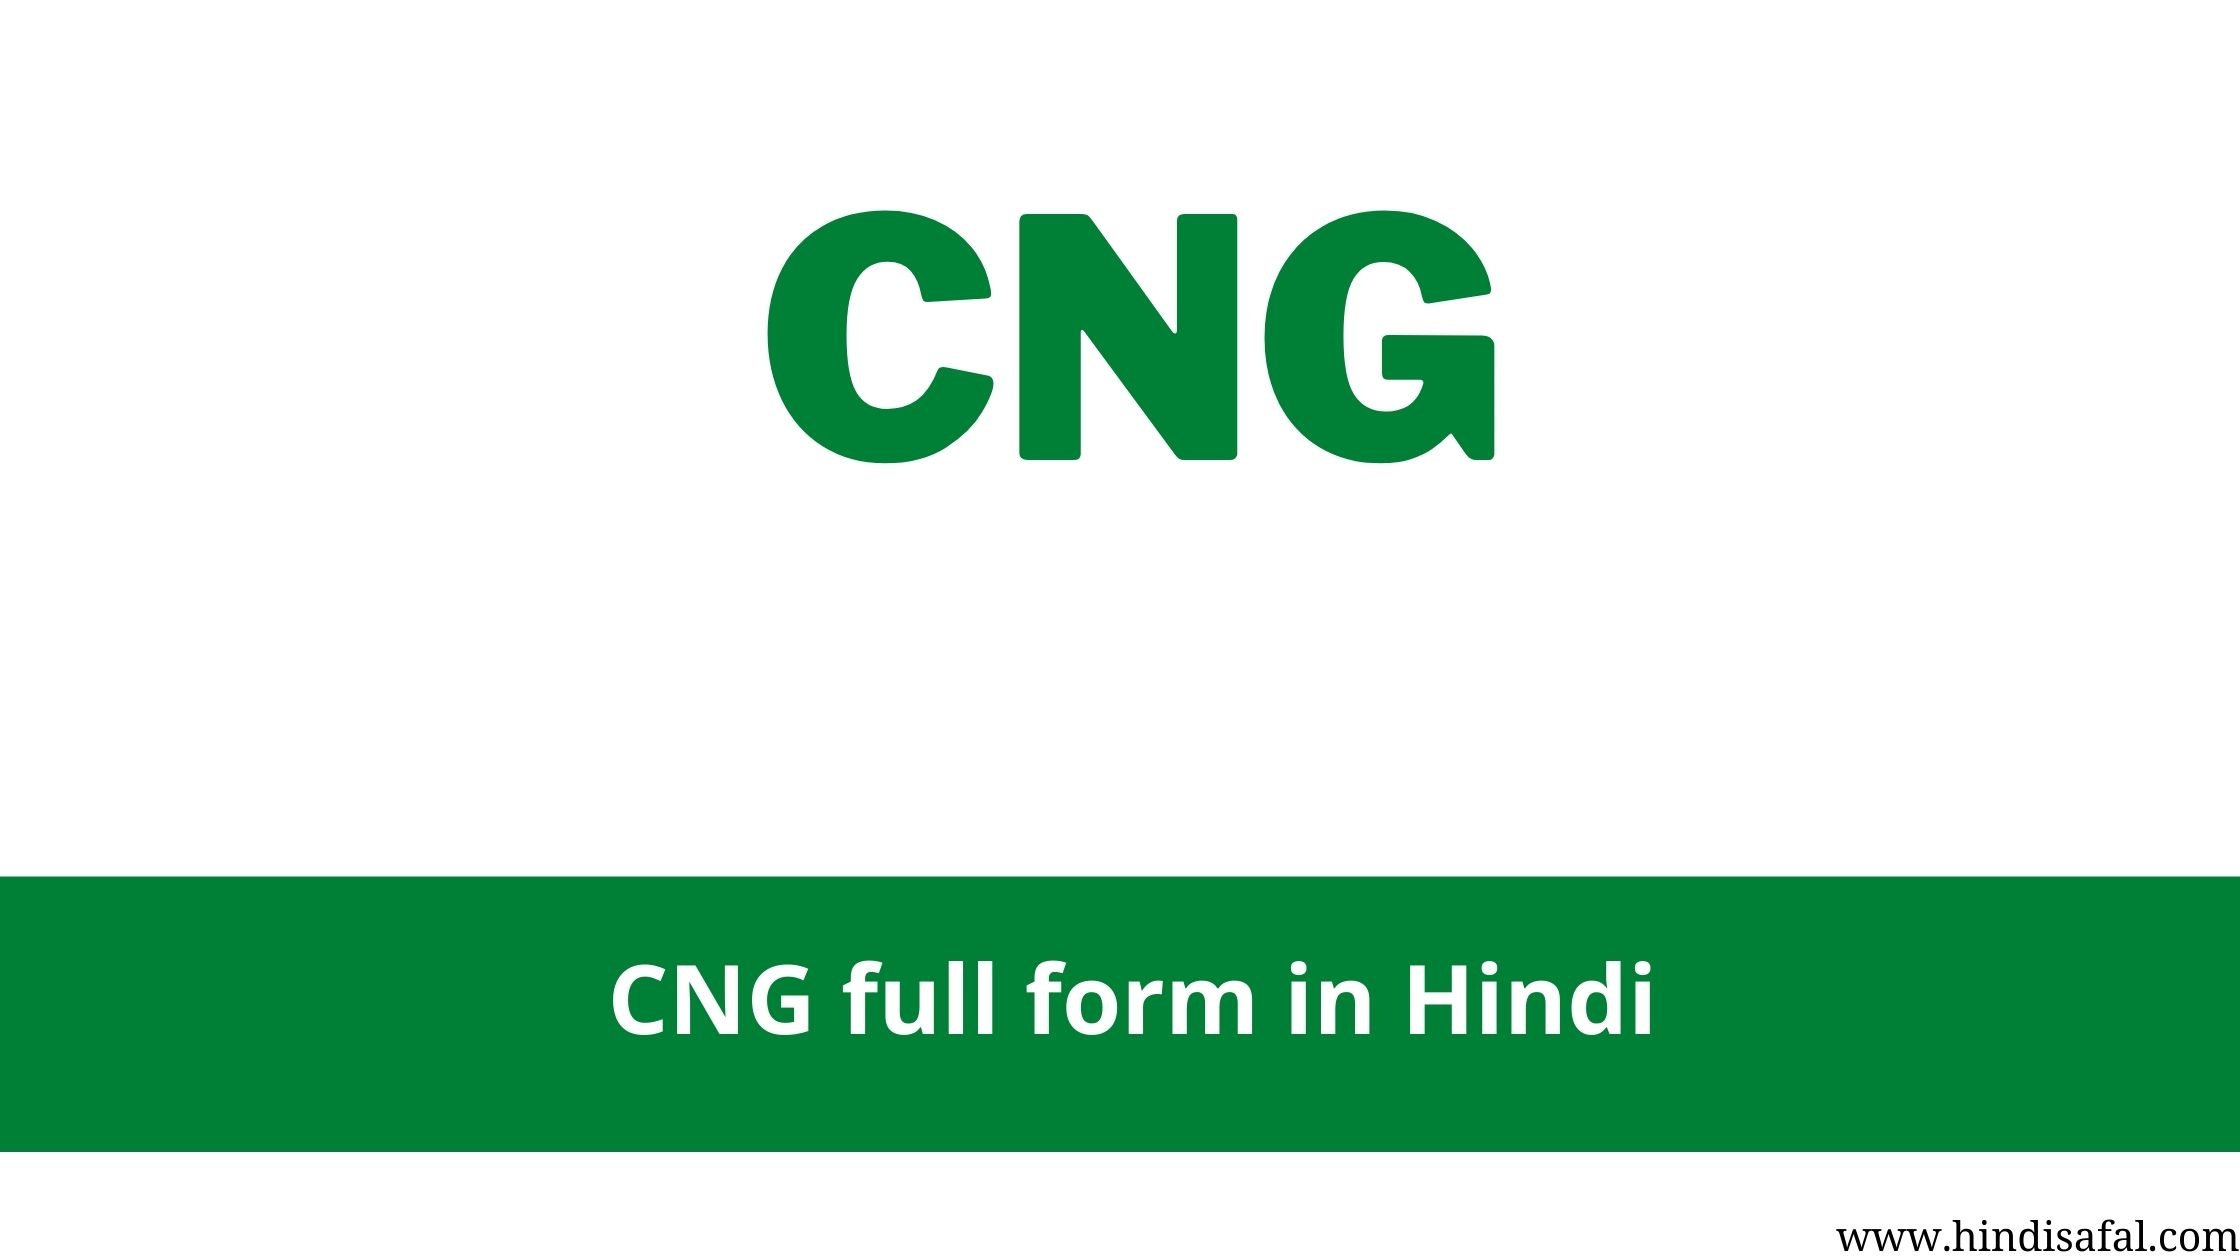 CNG full form in Hindi